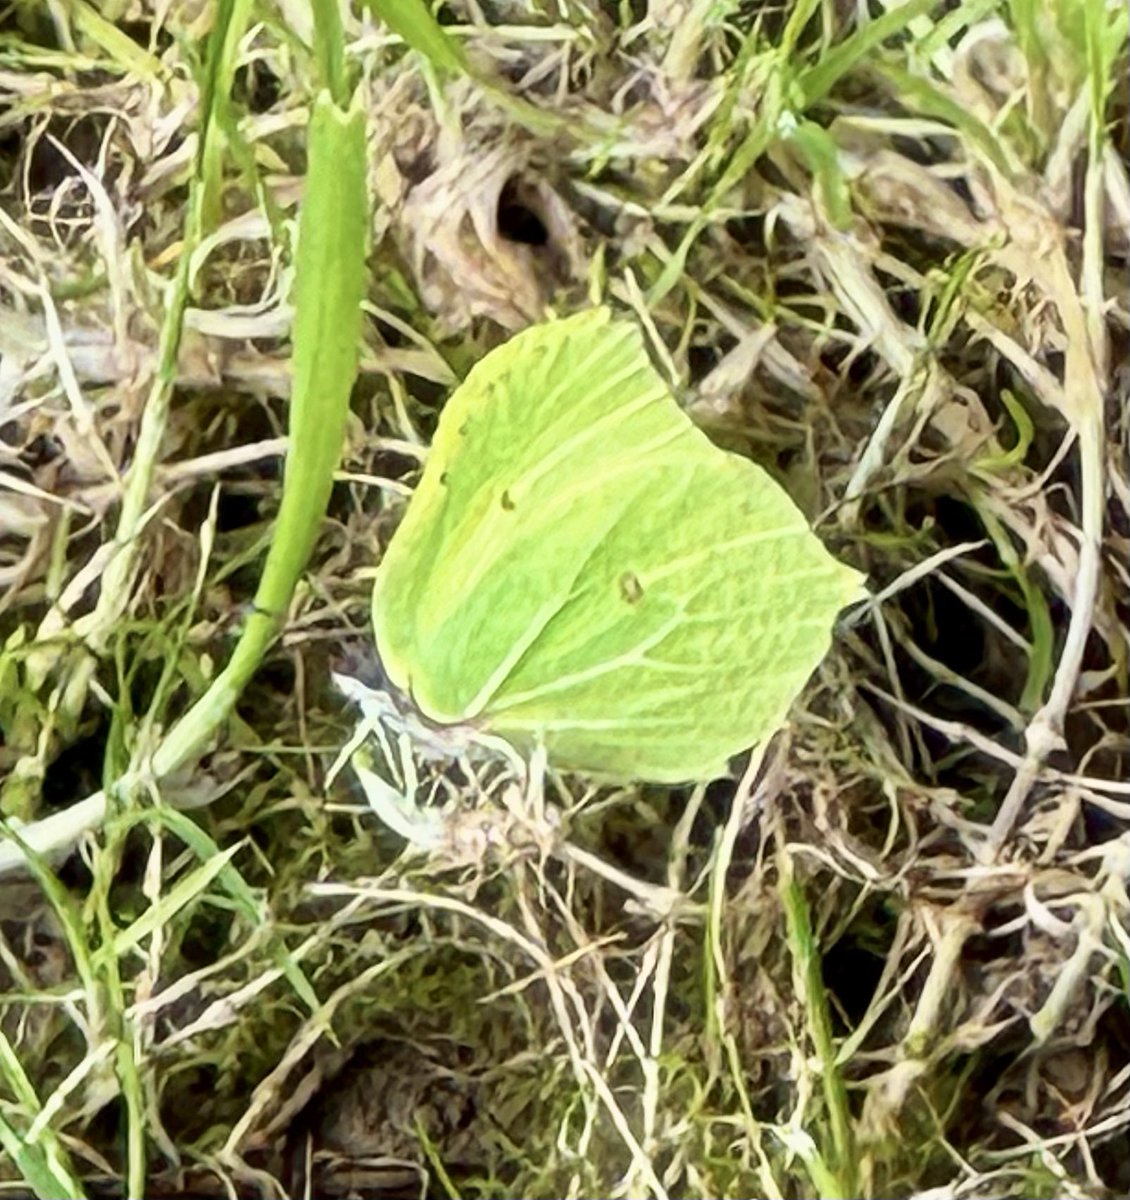 Very happy to see Brimstones out in the Cornwall sun this afternoon. @Cornwall_BC @savebutterflies